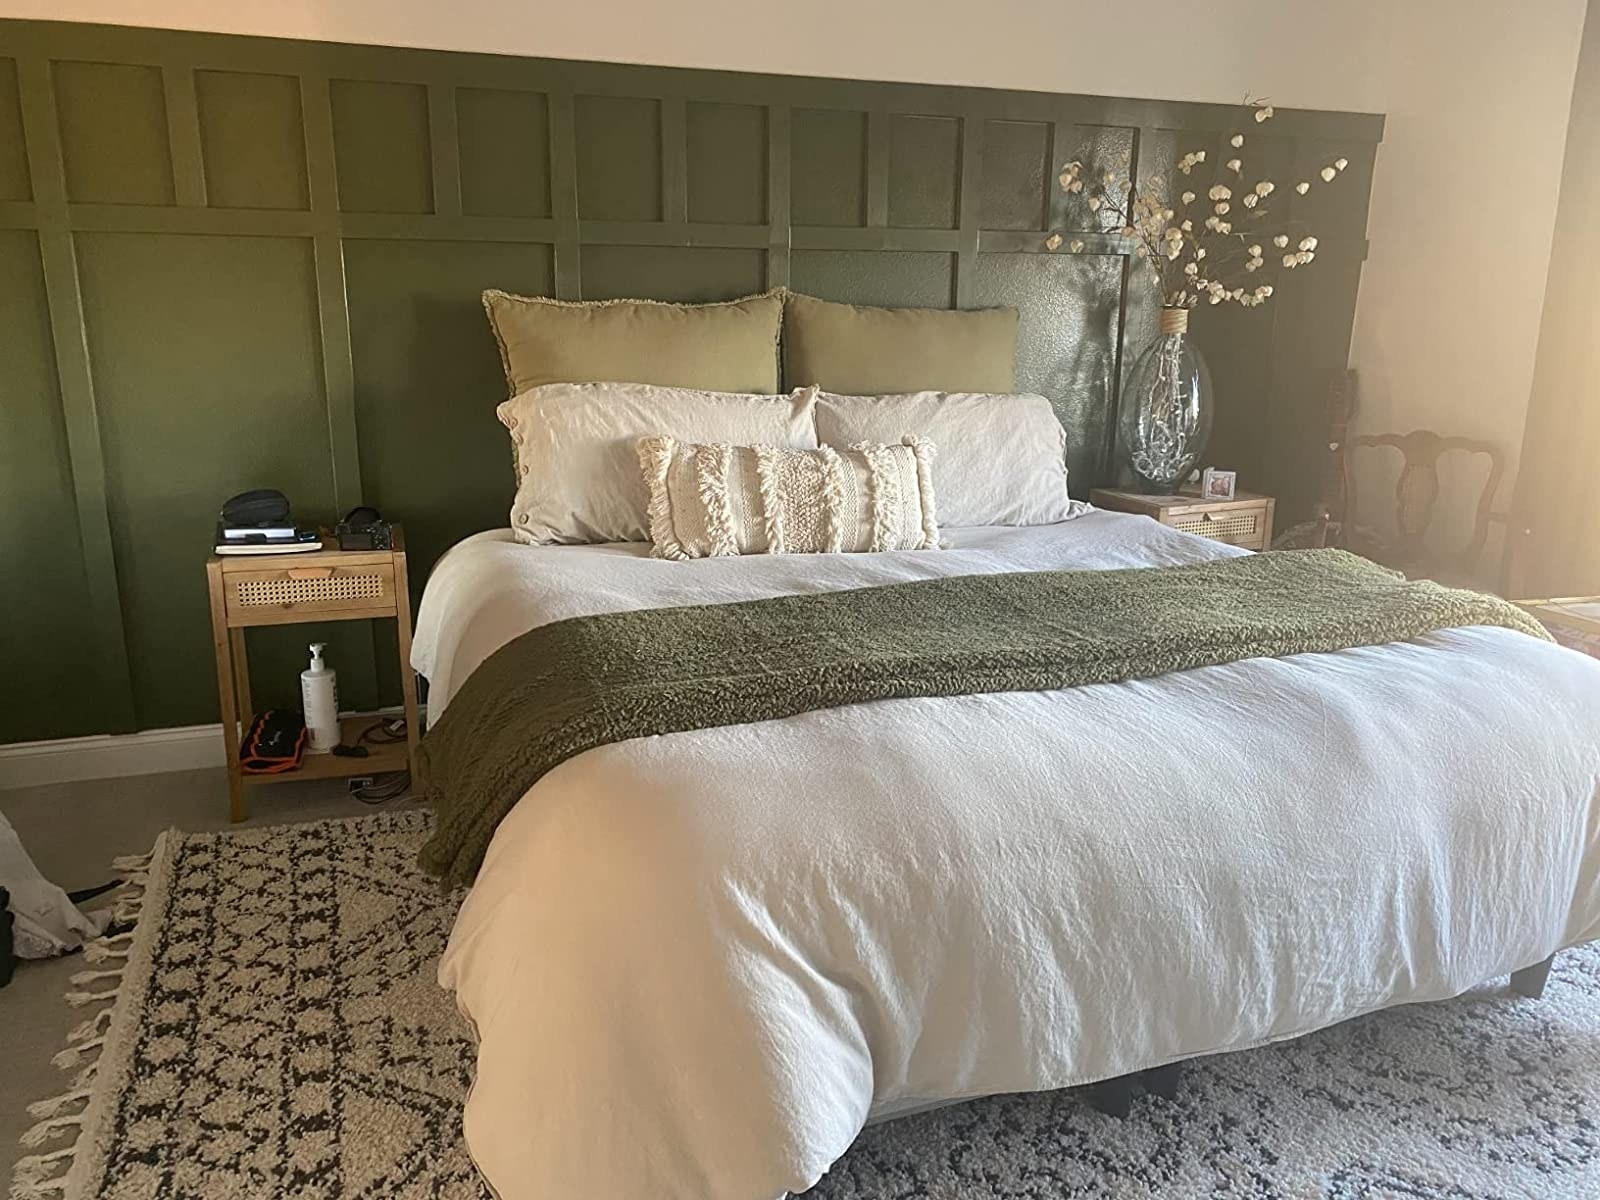 Reviewer image of the white duvet cover on their bed